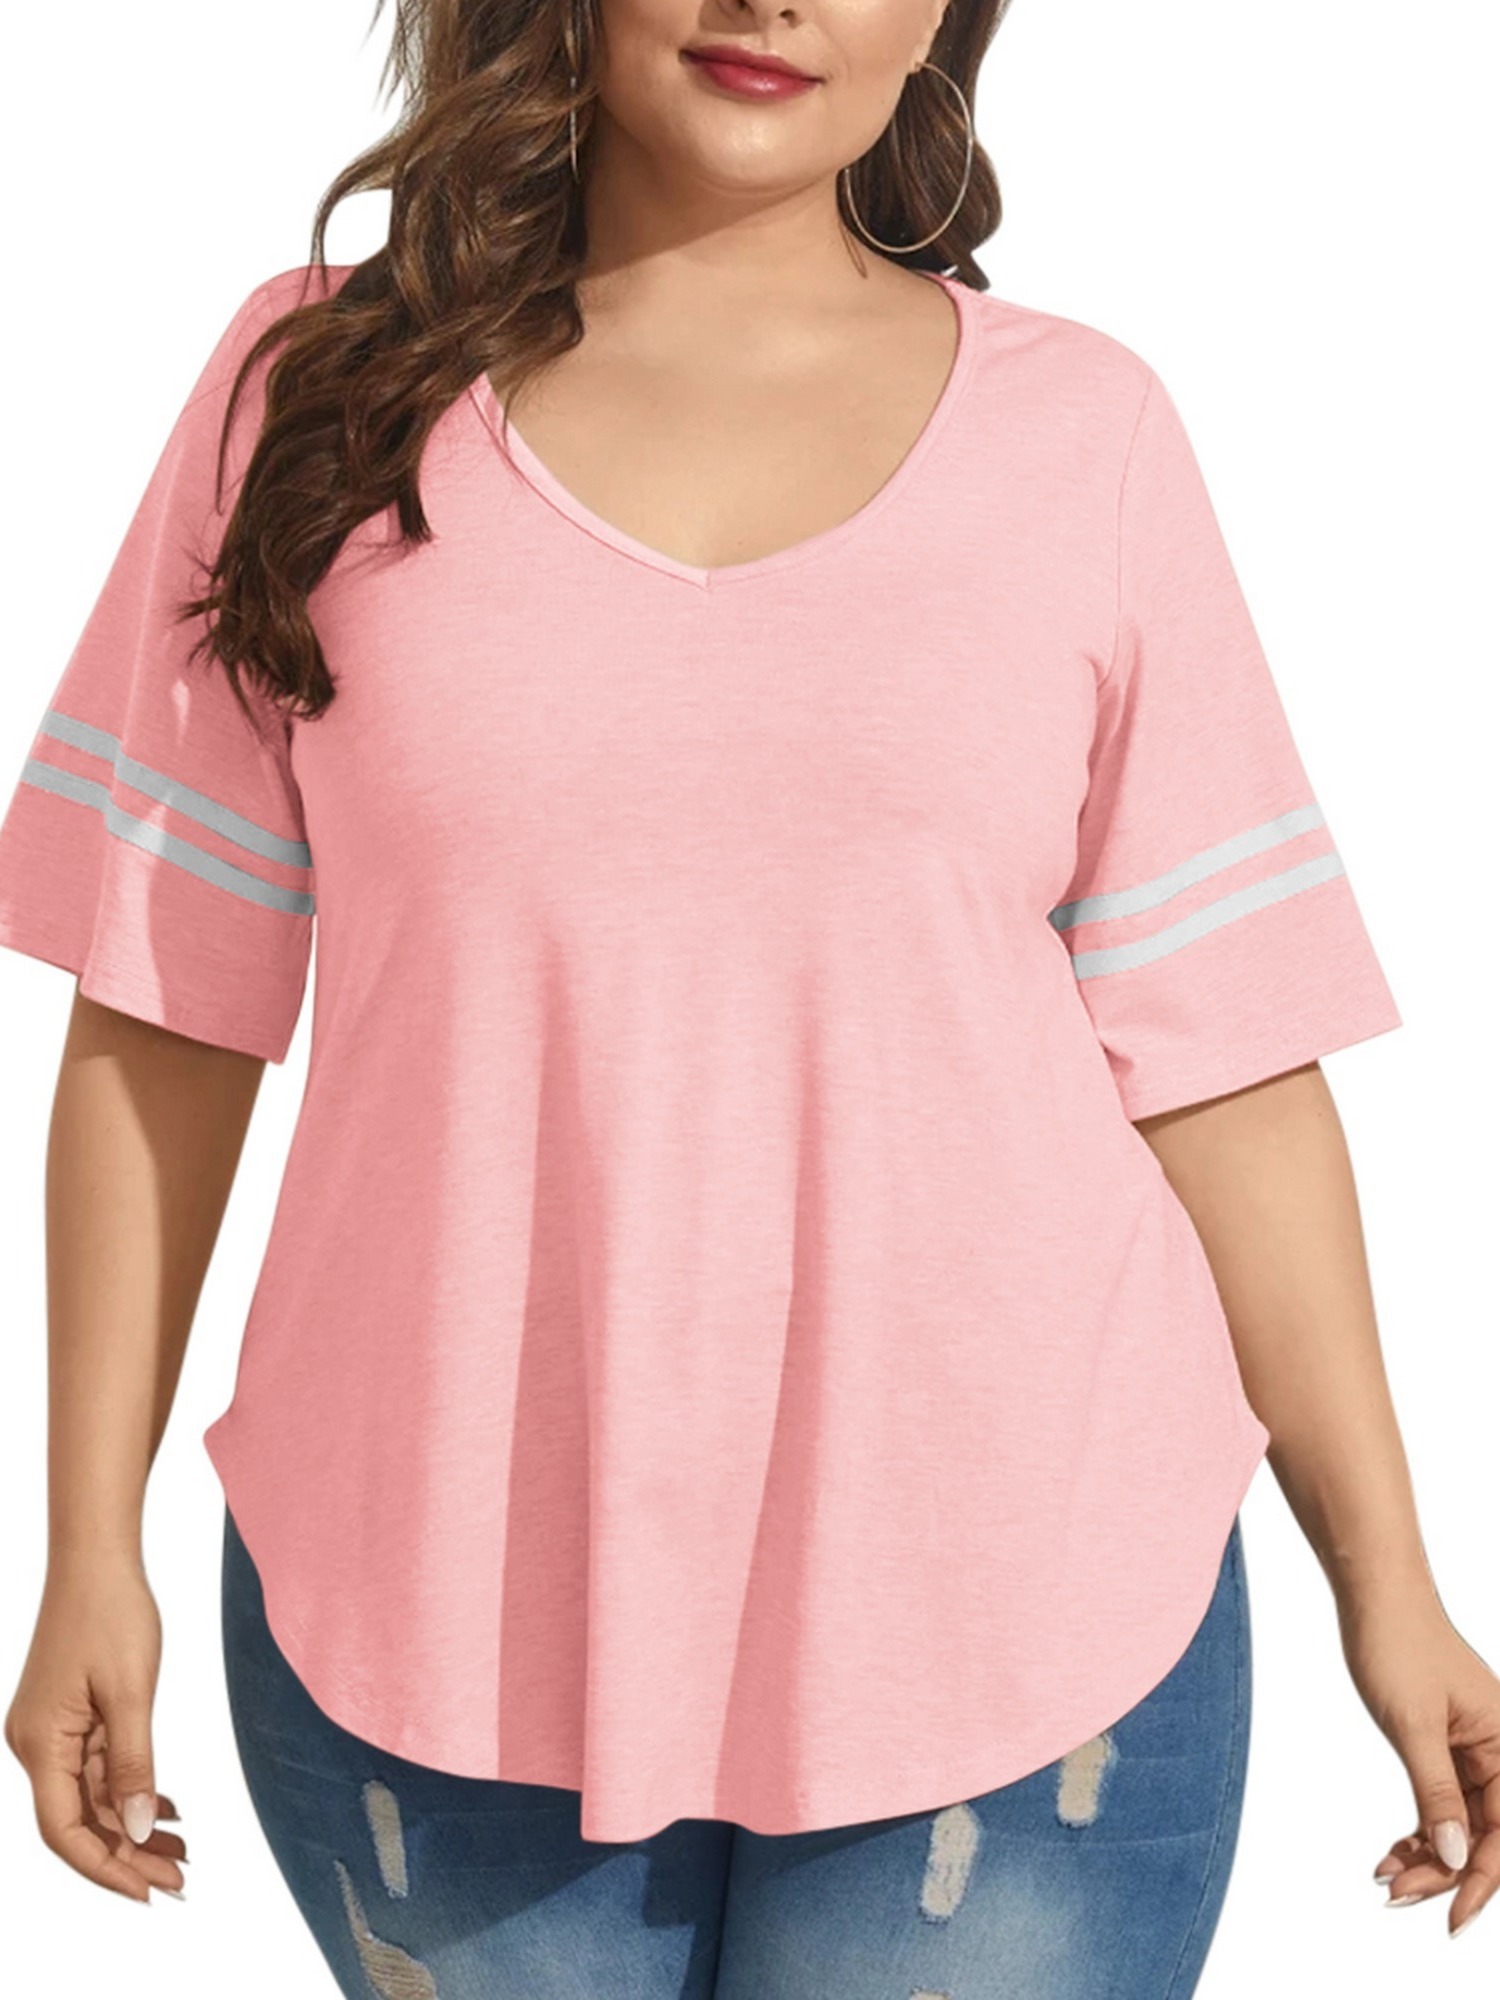  Plus Size Shirt For Women Summer Crew Round Neck Button  Basic Tops Oversized Short Sleeve Tie Dye Pink Stripes Henley Shirts Ladies  Loose Fit Tunic Blouse 5X 5XL 26W 28W